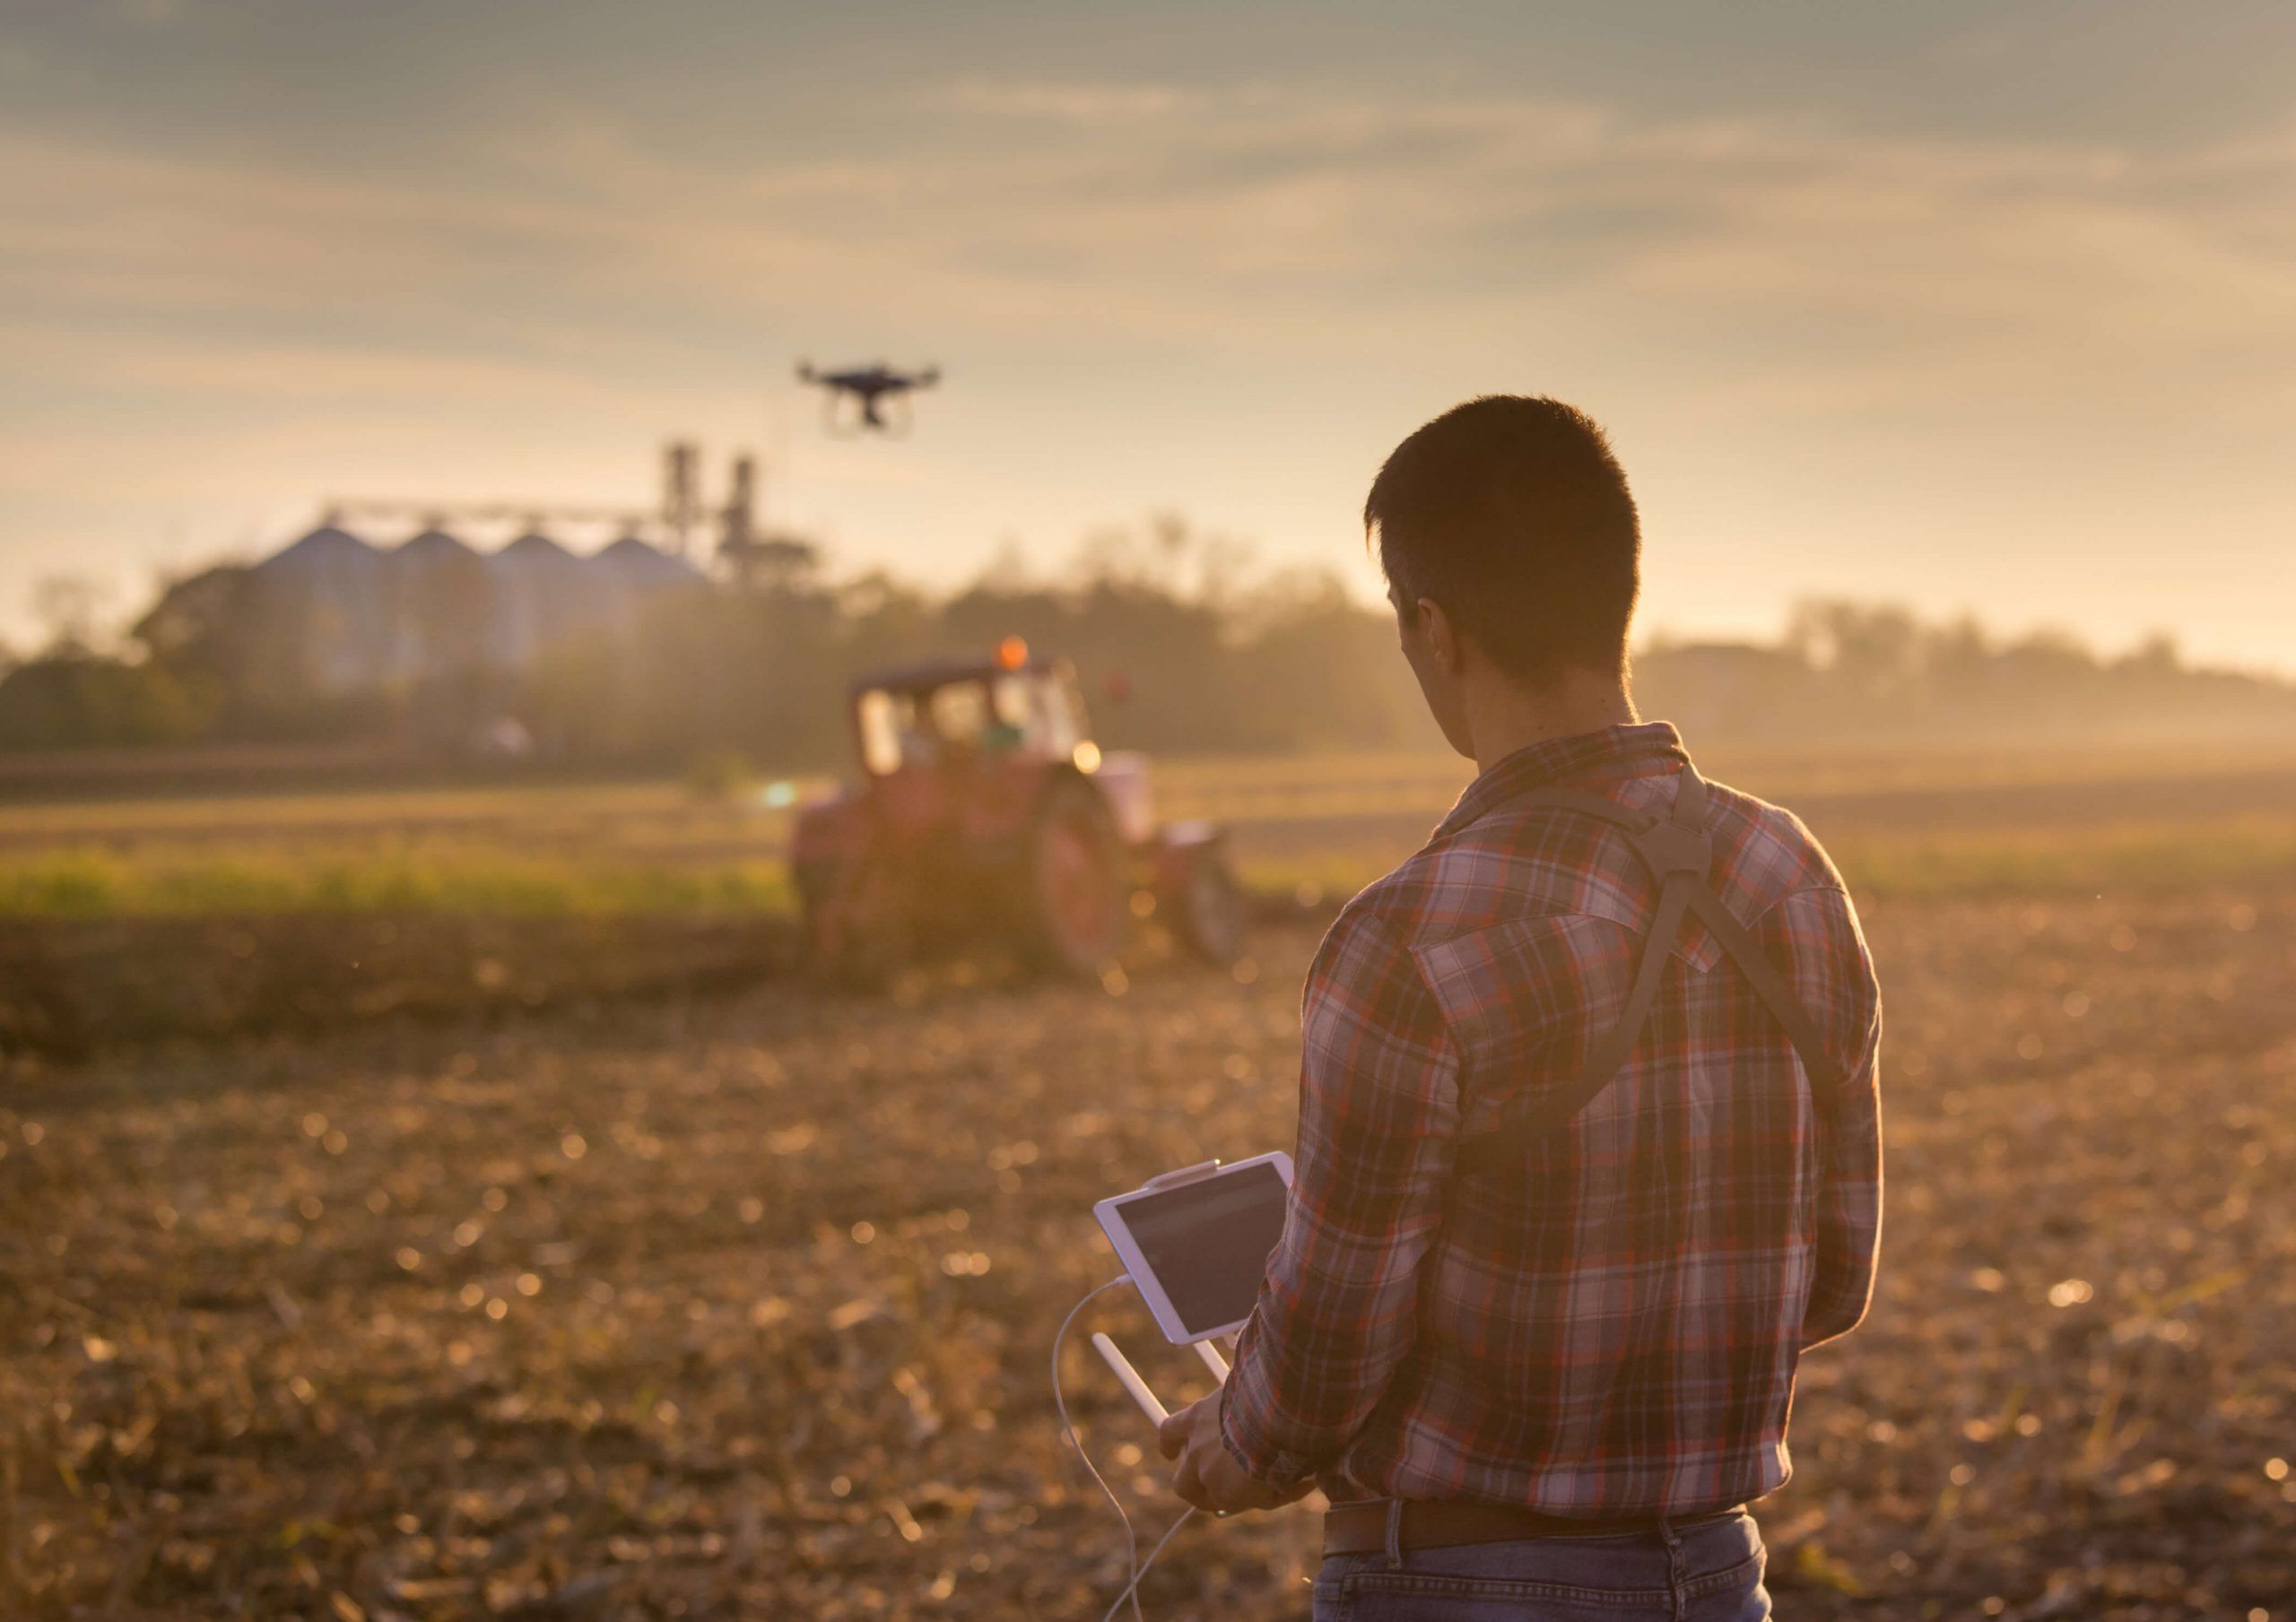 farmer using drone in field for precision agriculture and farm management